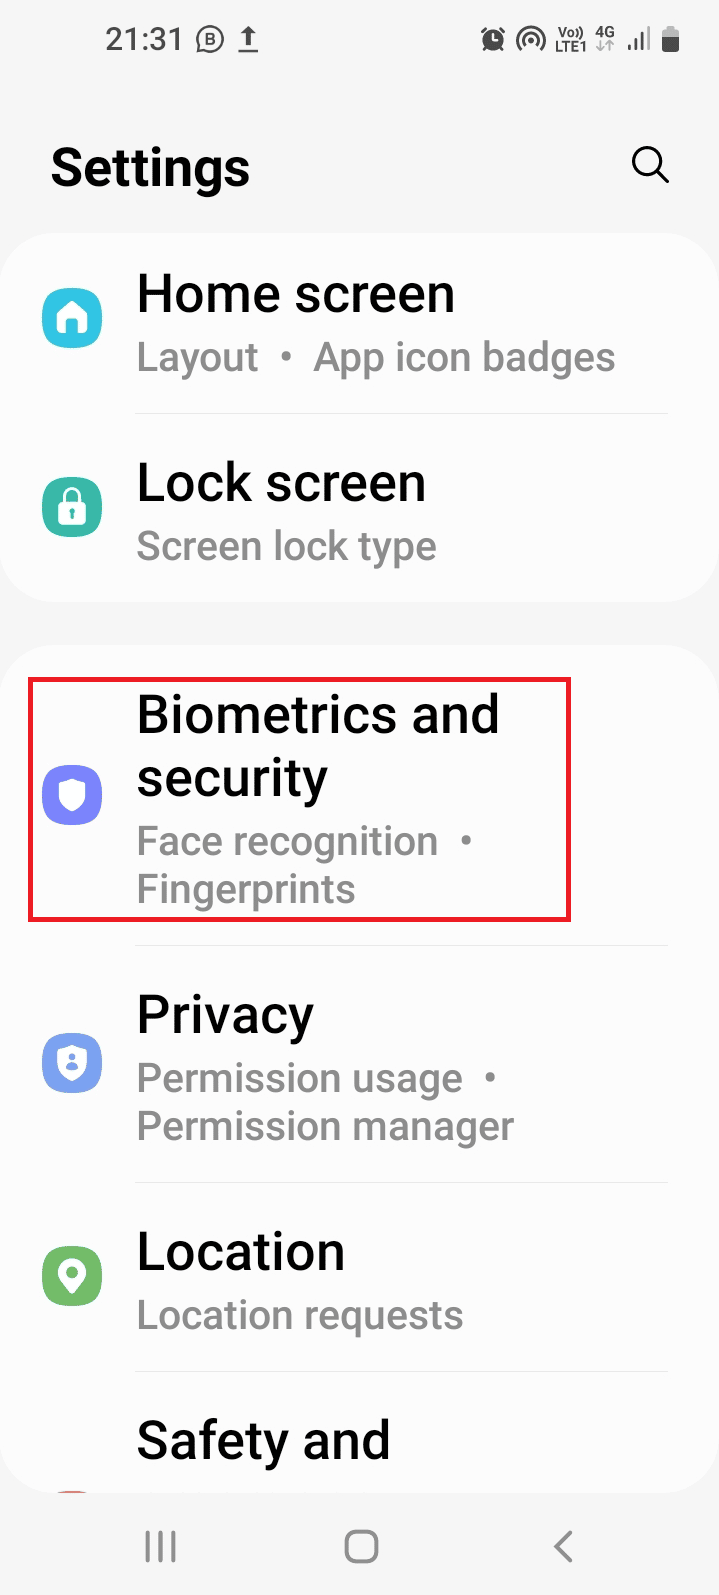 Tap on the Biometrics and security tab